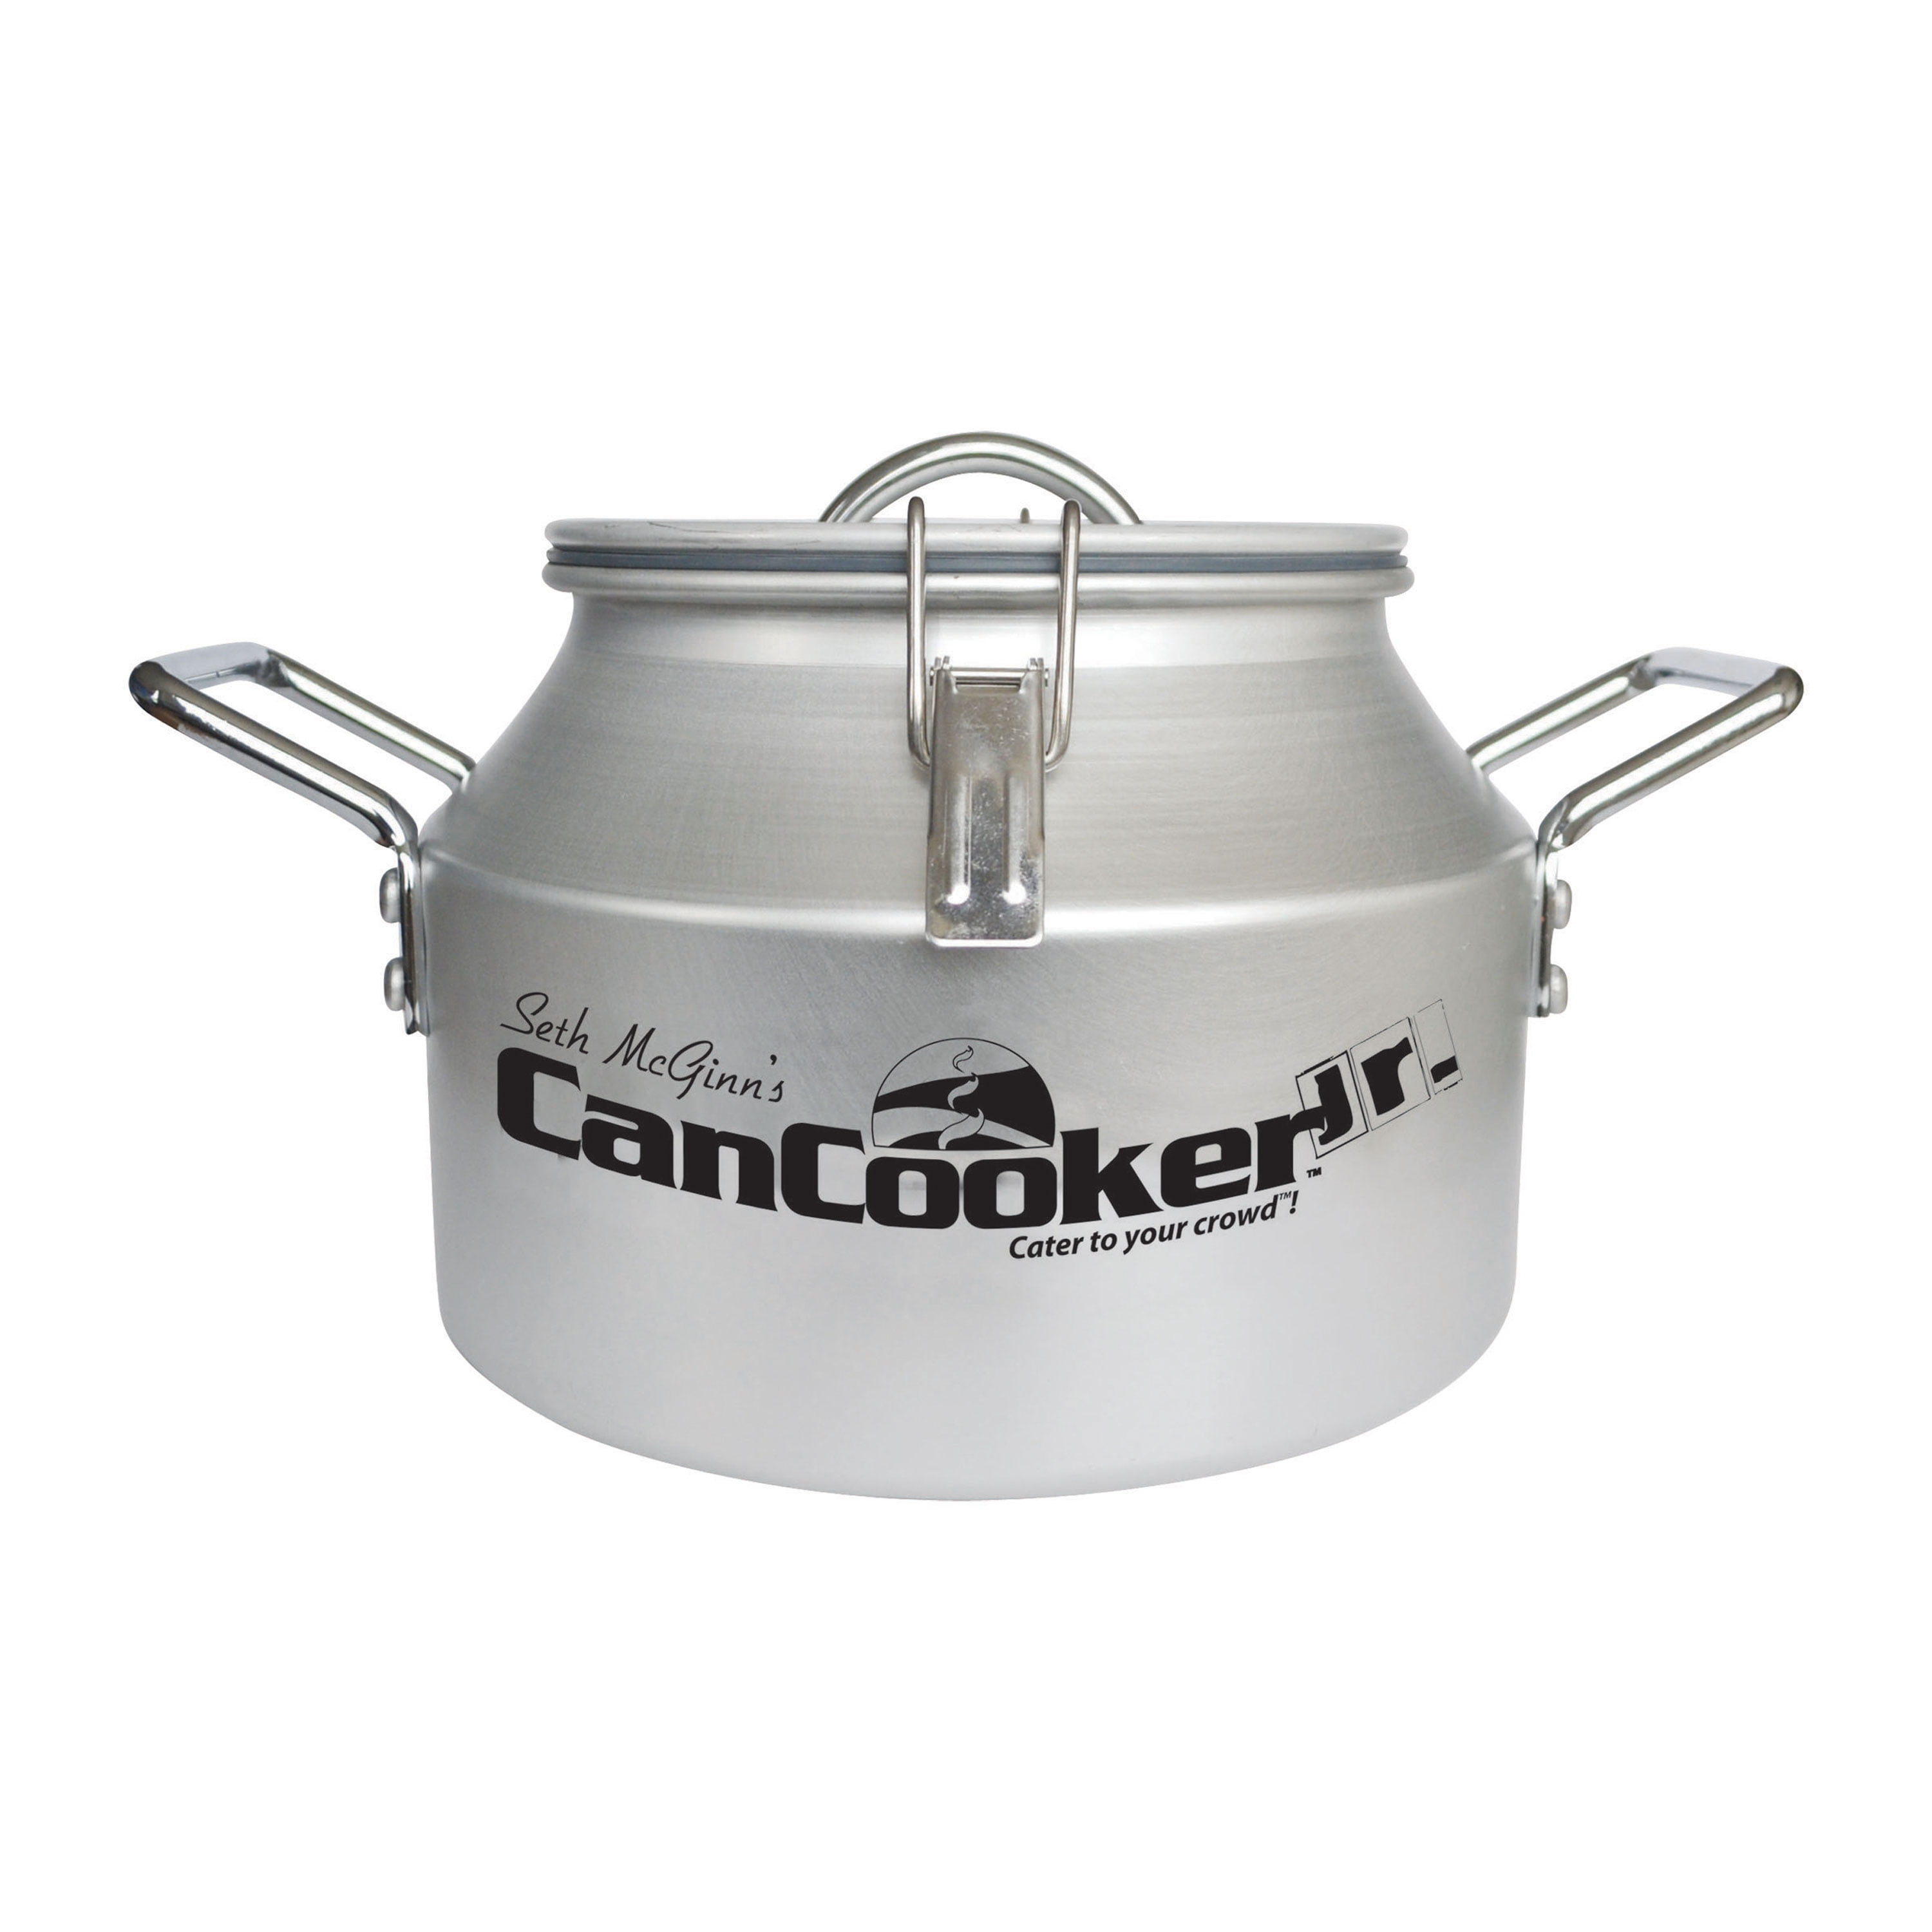 2 Gallon Convection Steam Cooker for Home and Camping CanCooker Signature Series